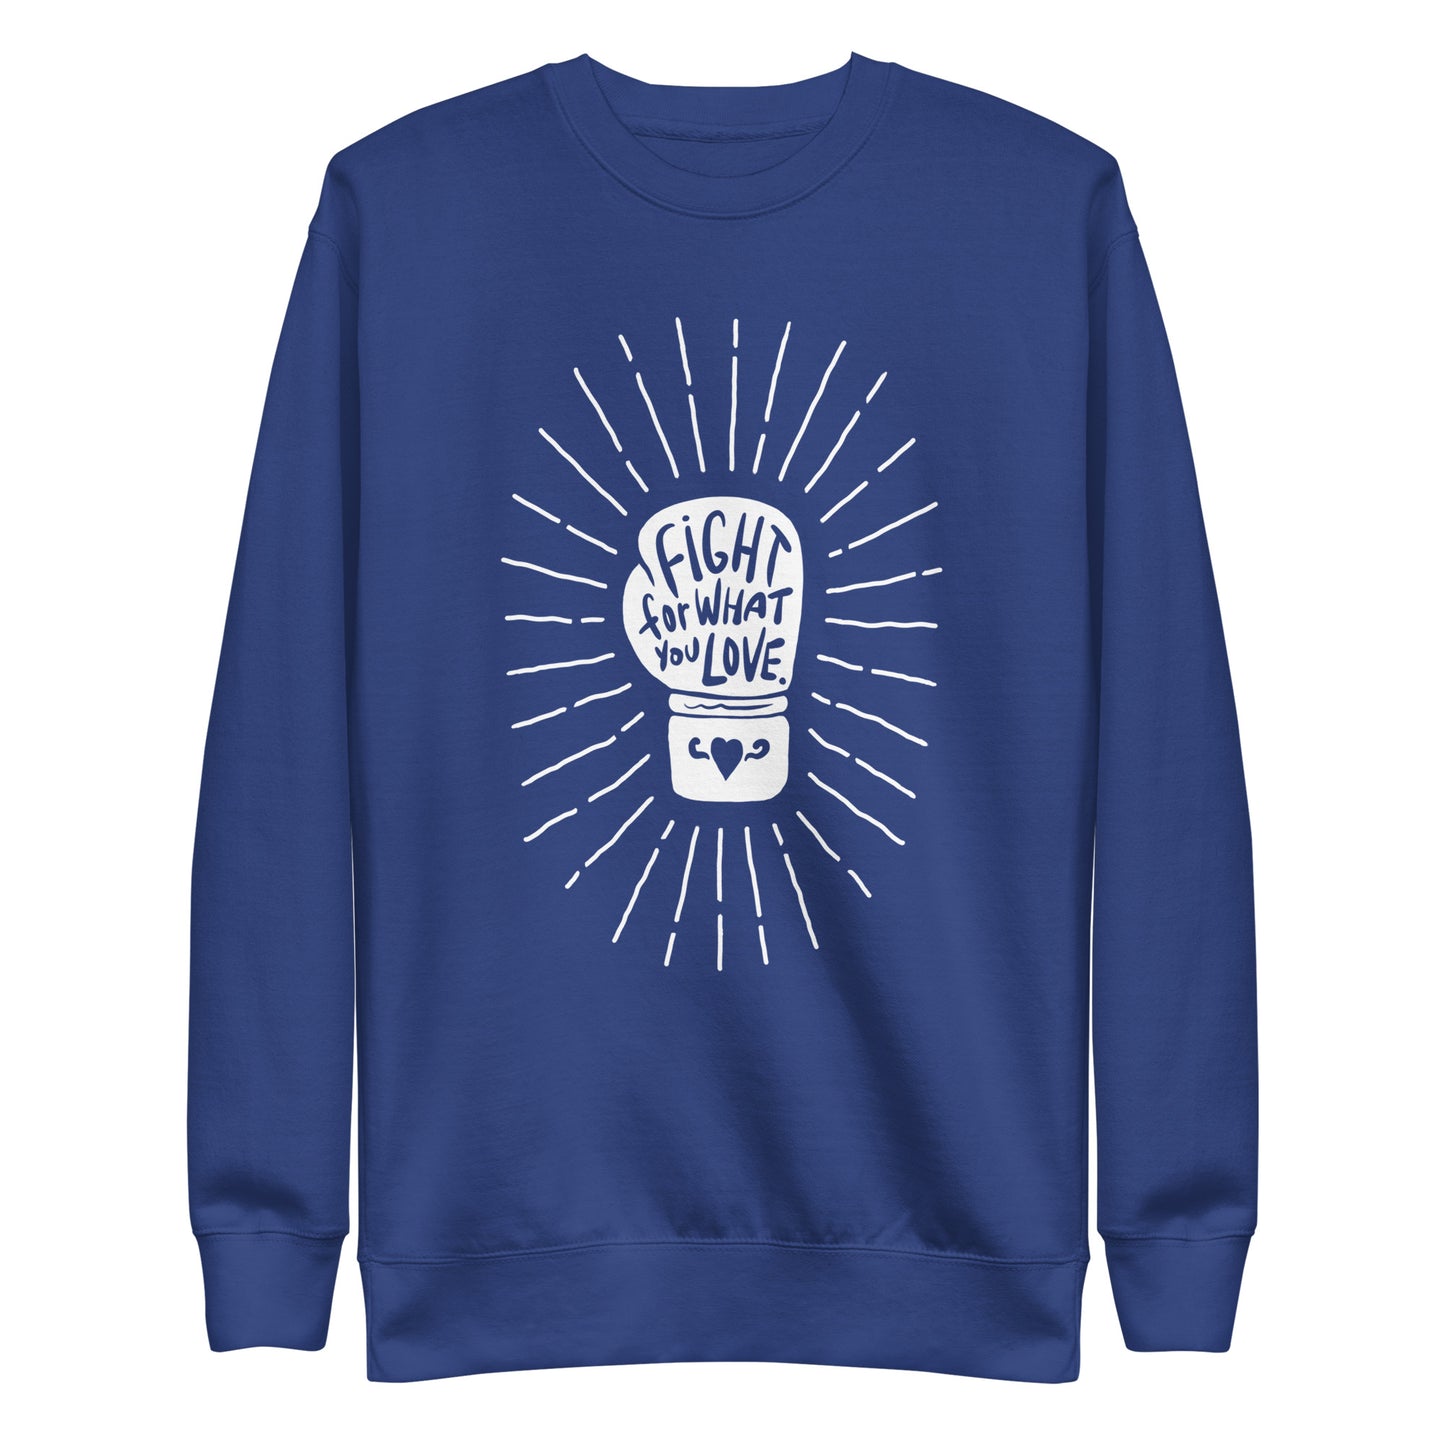 Fight For What You Love - Sweatshirt